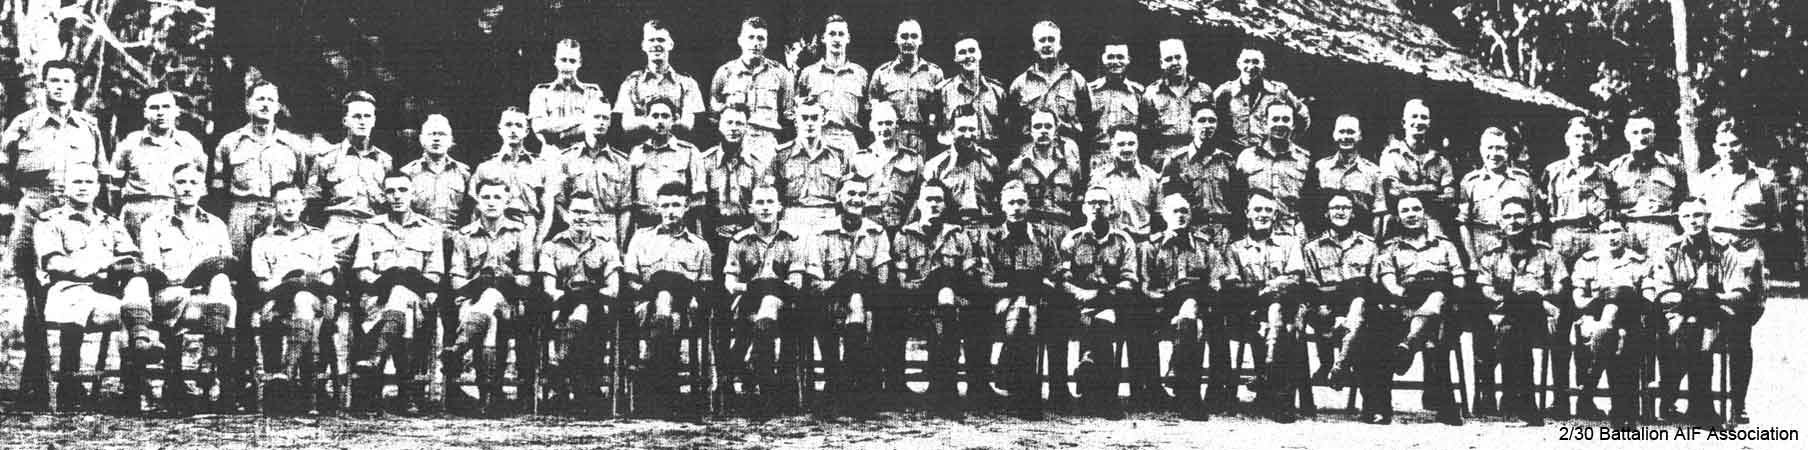 Mortar Platoon
Left to right:

Back row:
1)NX24909 - DU ROSS, Stanley Claude Melbourne (Frenchy), Sgt. - HQ Company, Mortar Platoon
2)
3)
4)
5)
6)
7)
8)
9)
10)

Middle row:
1)
2)
3)
4)
5)
6)
7)
8)
9)
10)
11)
12)
13)
14)
15)
16)
17)
18)
19)
20)
21)
22)

Front row:
1)
2)
3)
4)
5)
6)
7)
8)
9)
10)
11)
12)
13)
14)
15)
16)
17)
18)
19)
